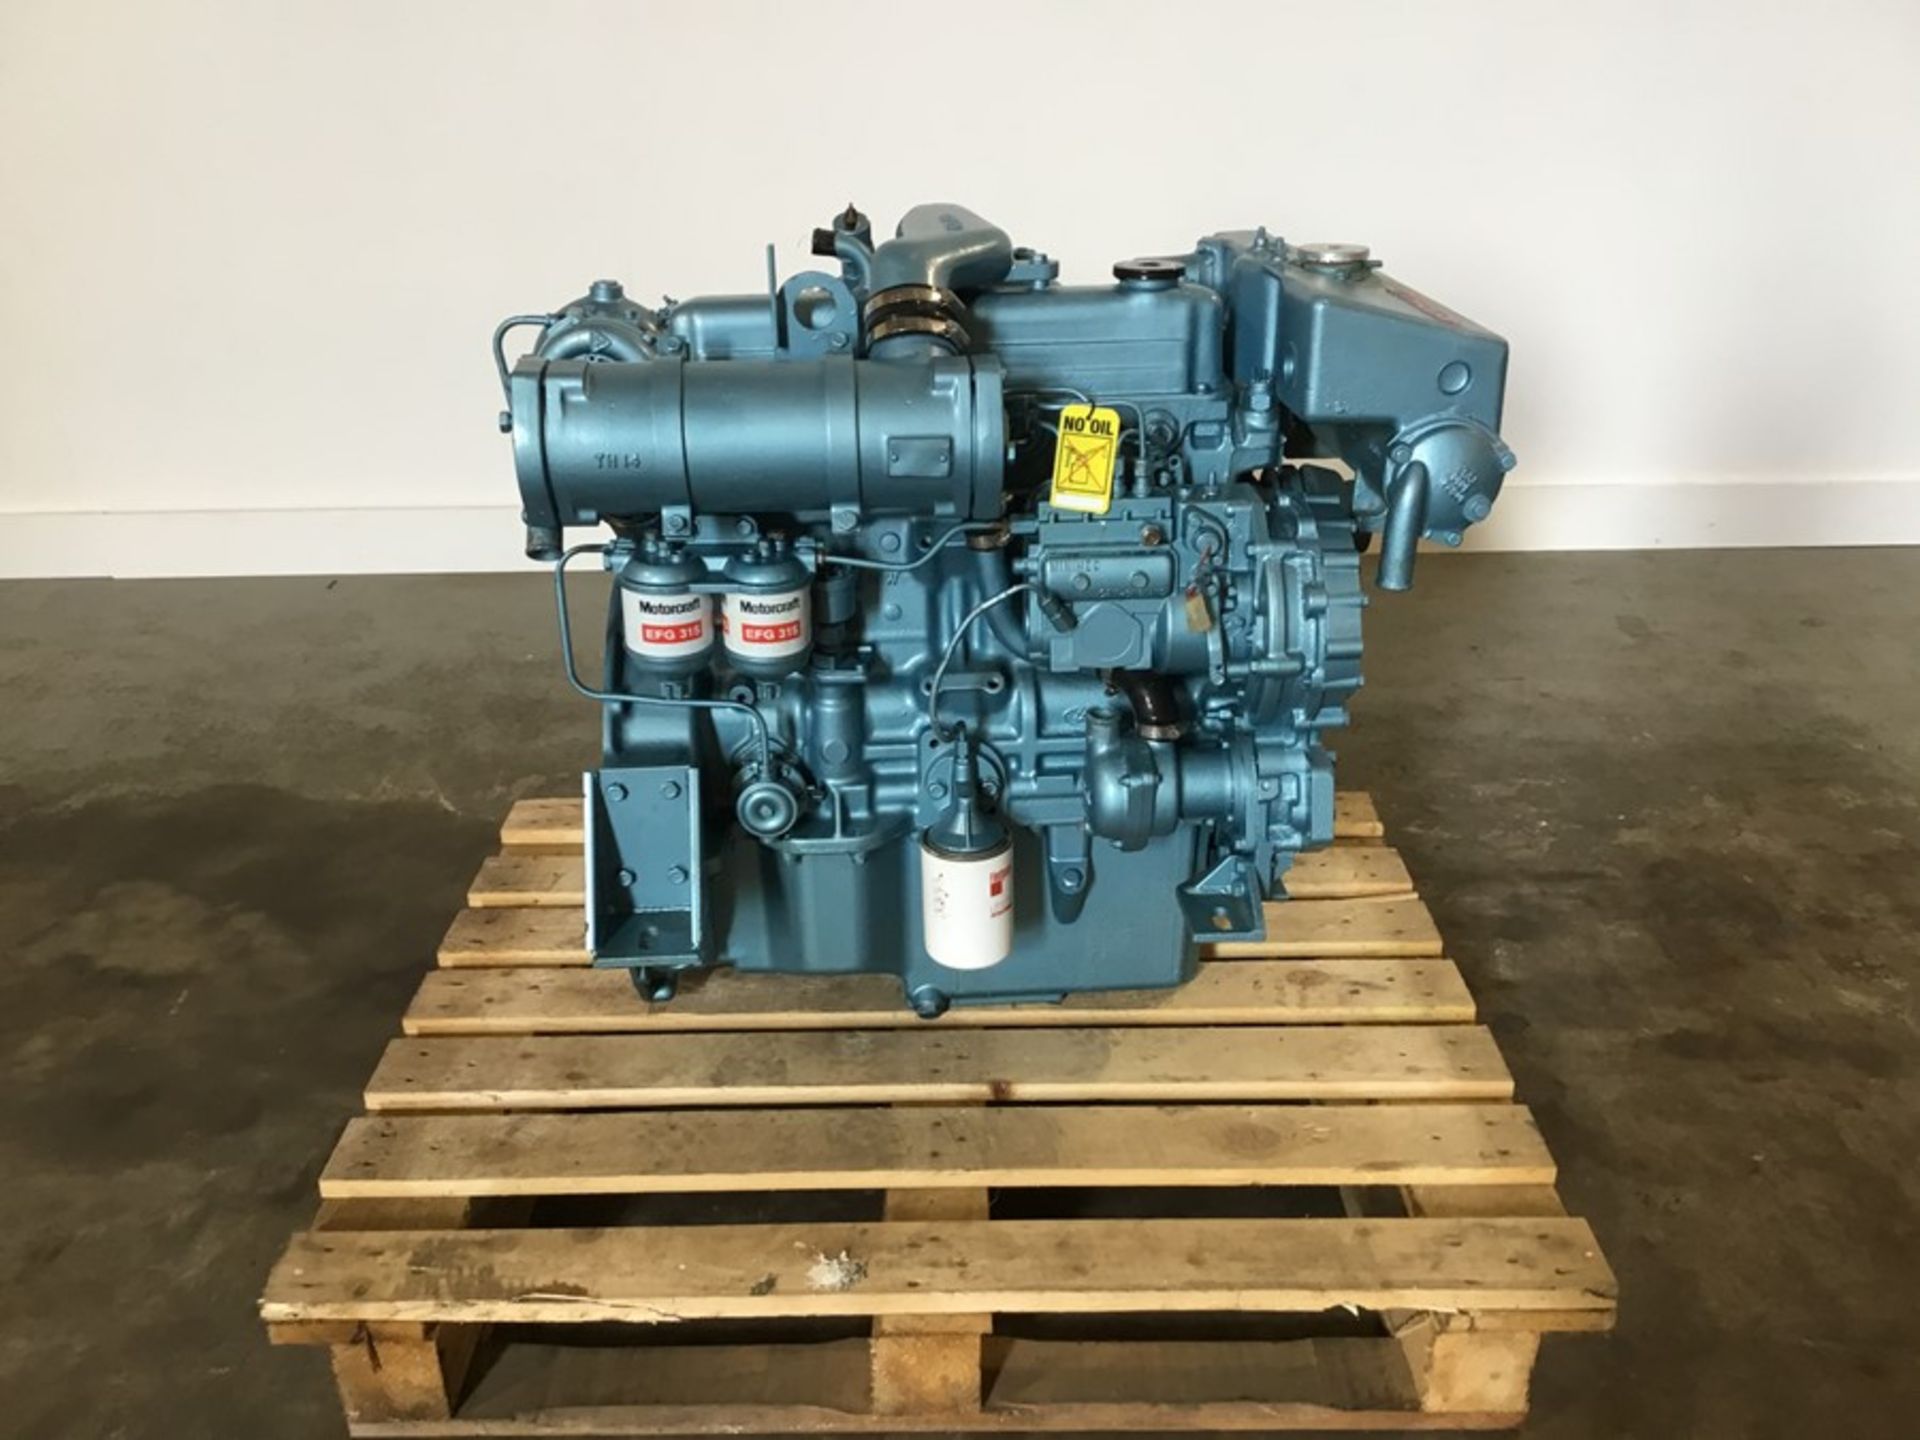 Ford 2722E Marine Diesel engine: Ford 2722e 4cyl Turbo 140Hp @2500Rpm used low hours - Image 11 of 18